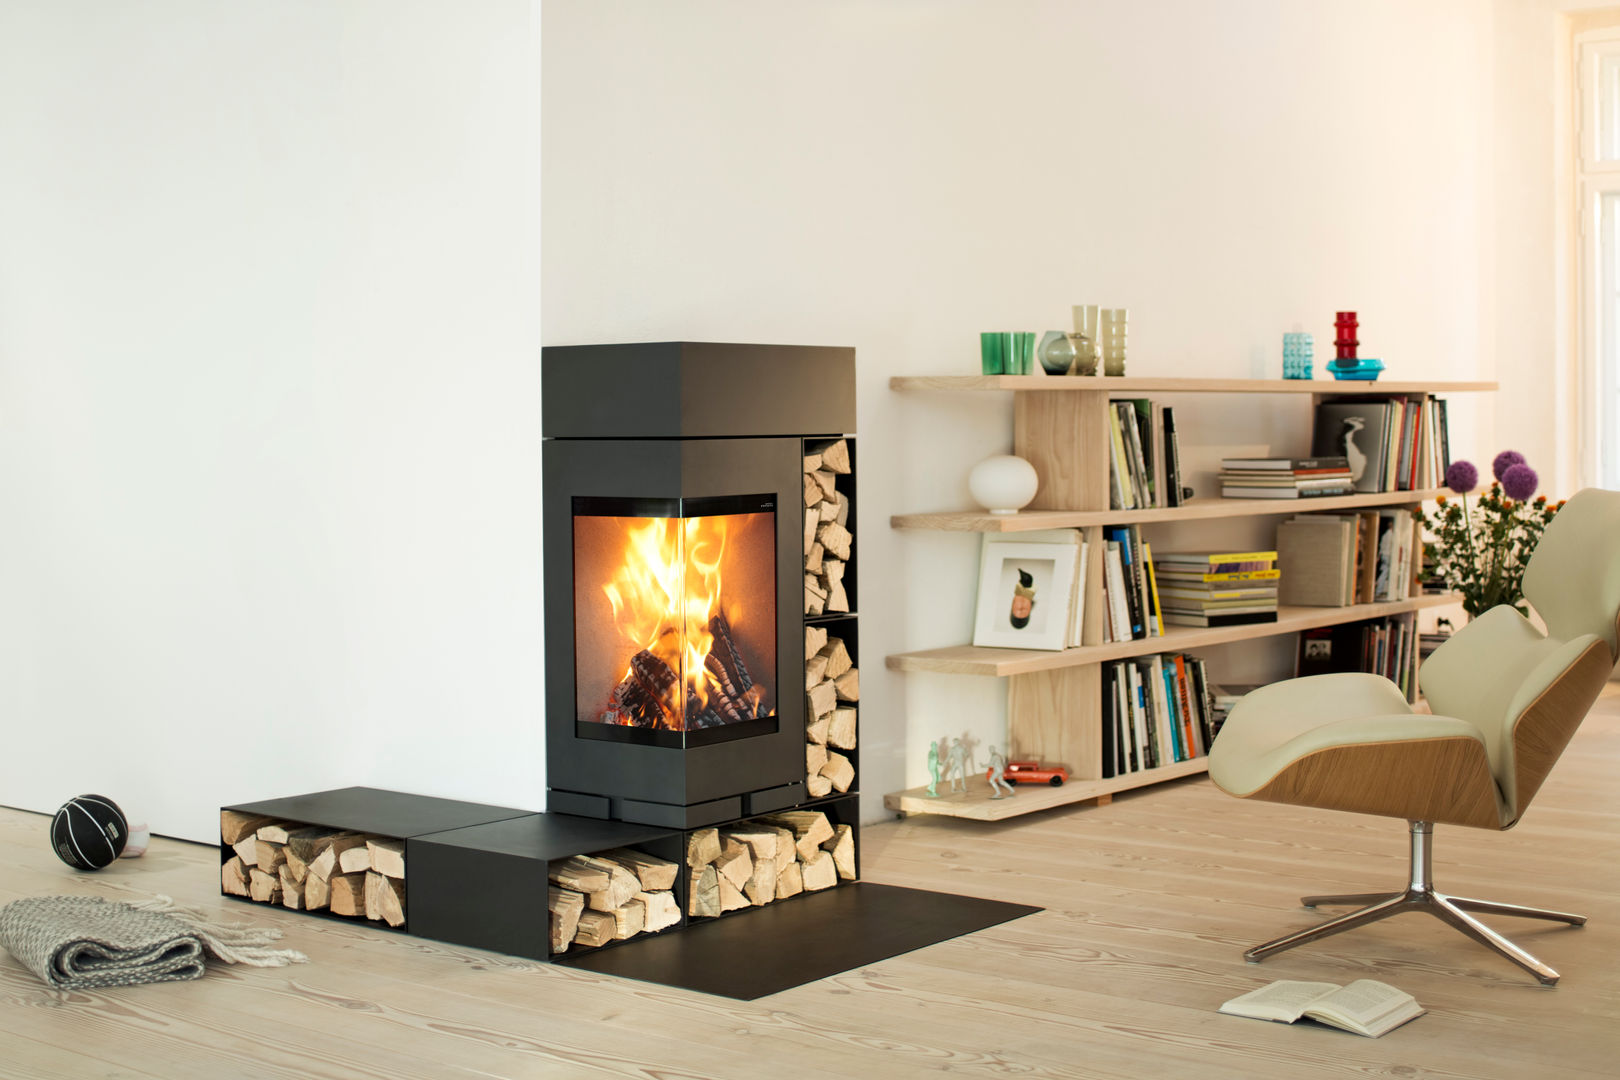 Kaminofen , Kachelofen & kamin Kachelofen & kamin Living room Fireplaces & accessories